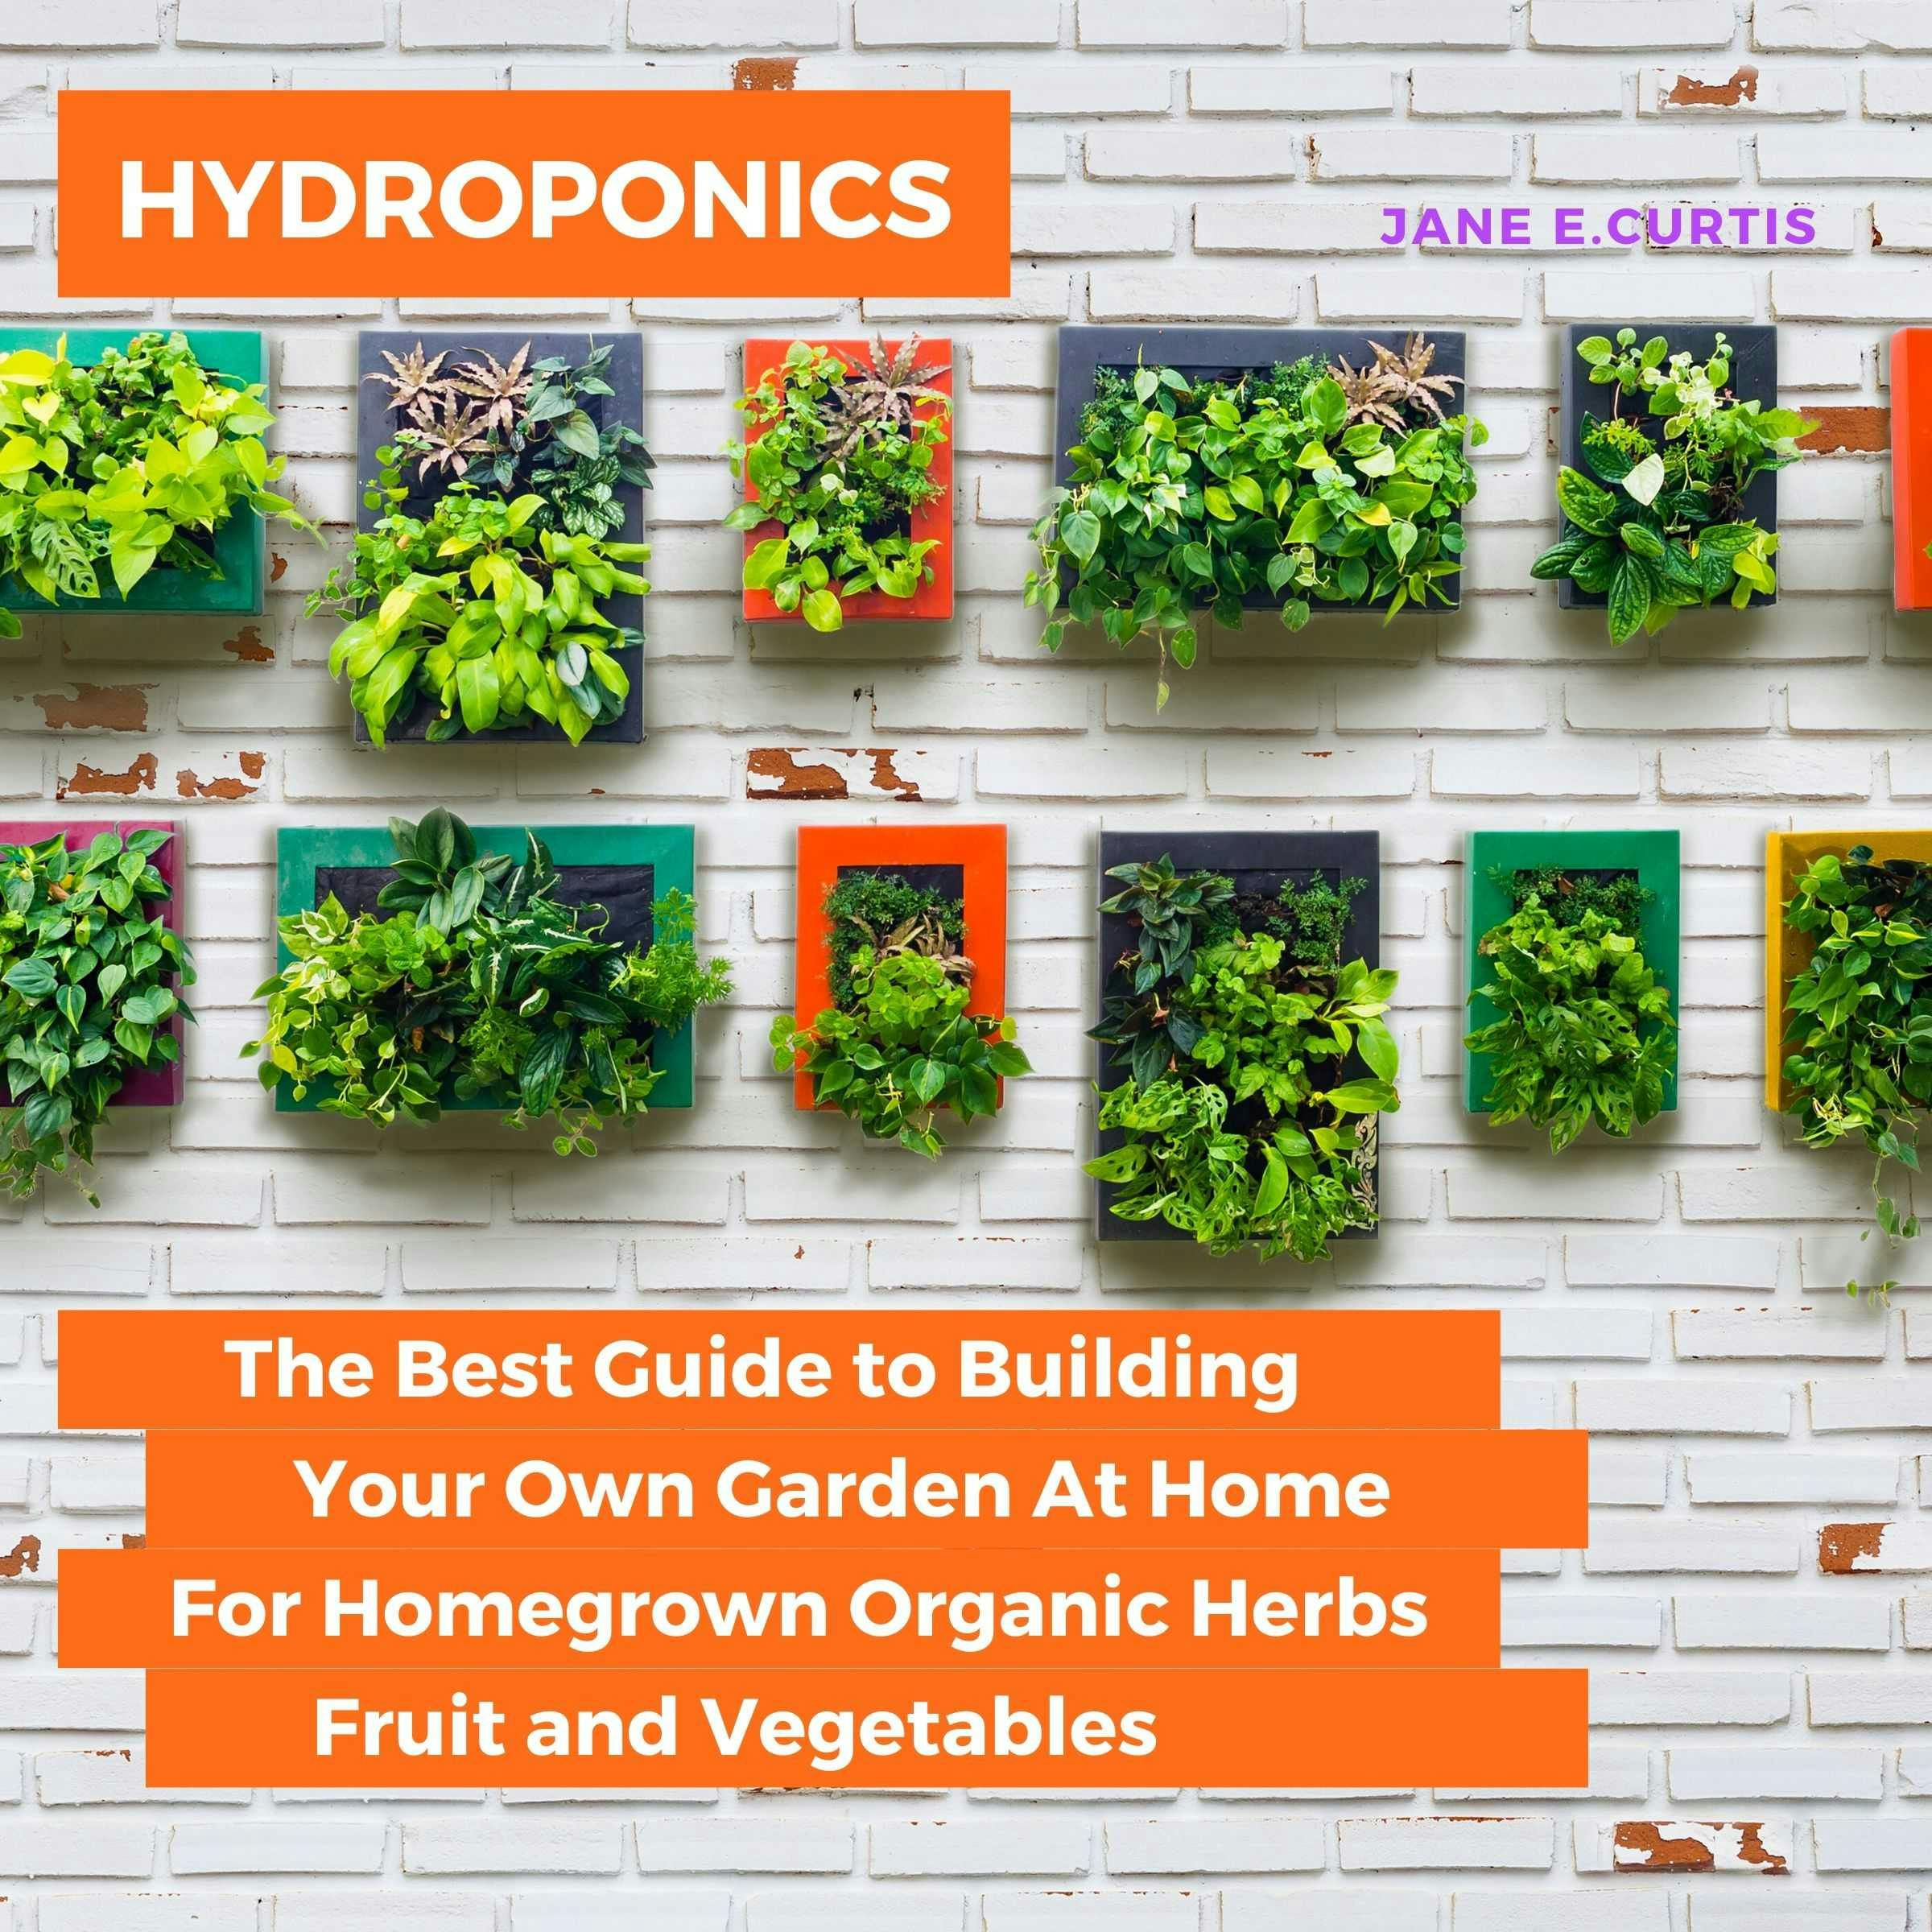 Hydroponics: The Best Guide to Building Your Own Garden At Home For Homegrown Organic Herbs, Fruit and Vegetables - Jane E. Curtis